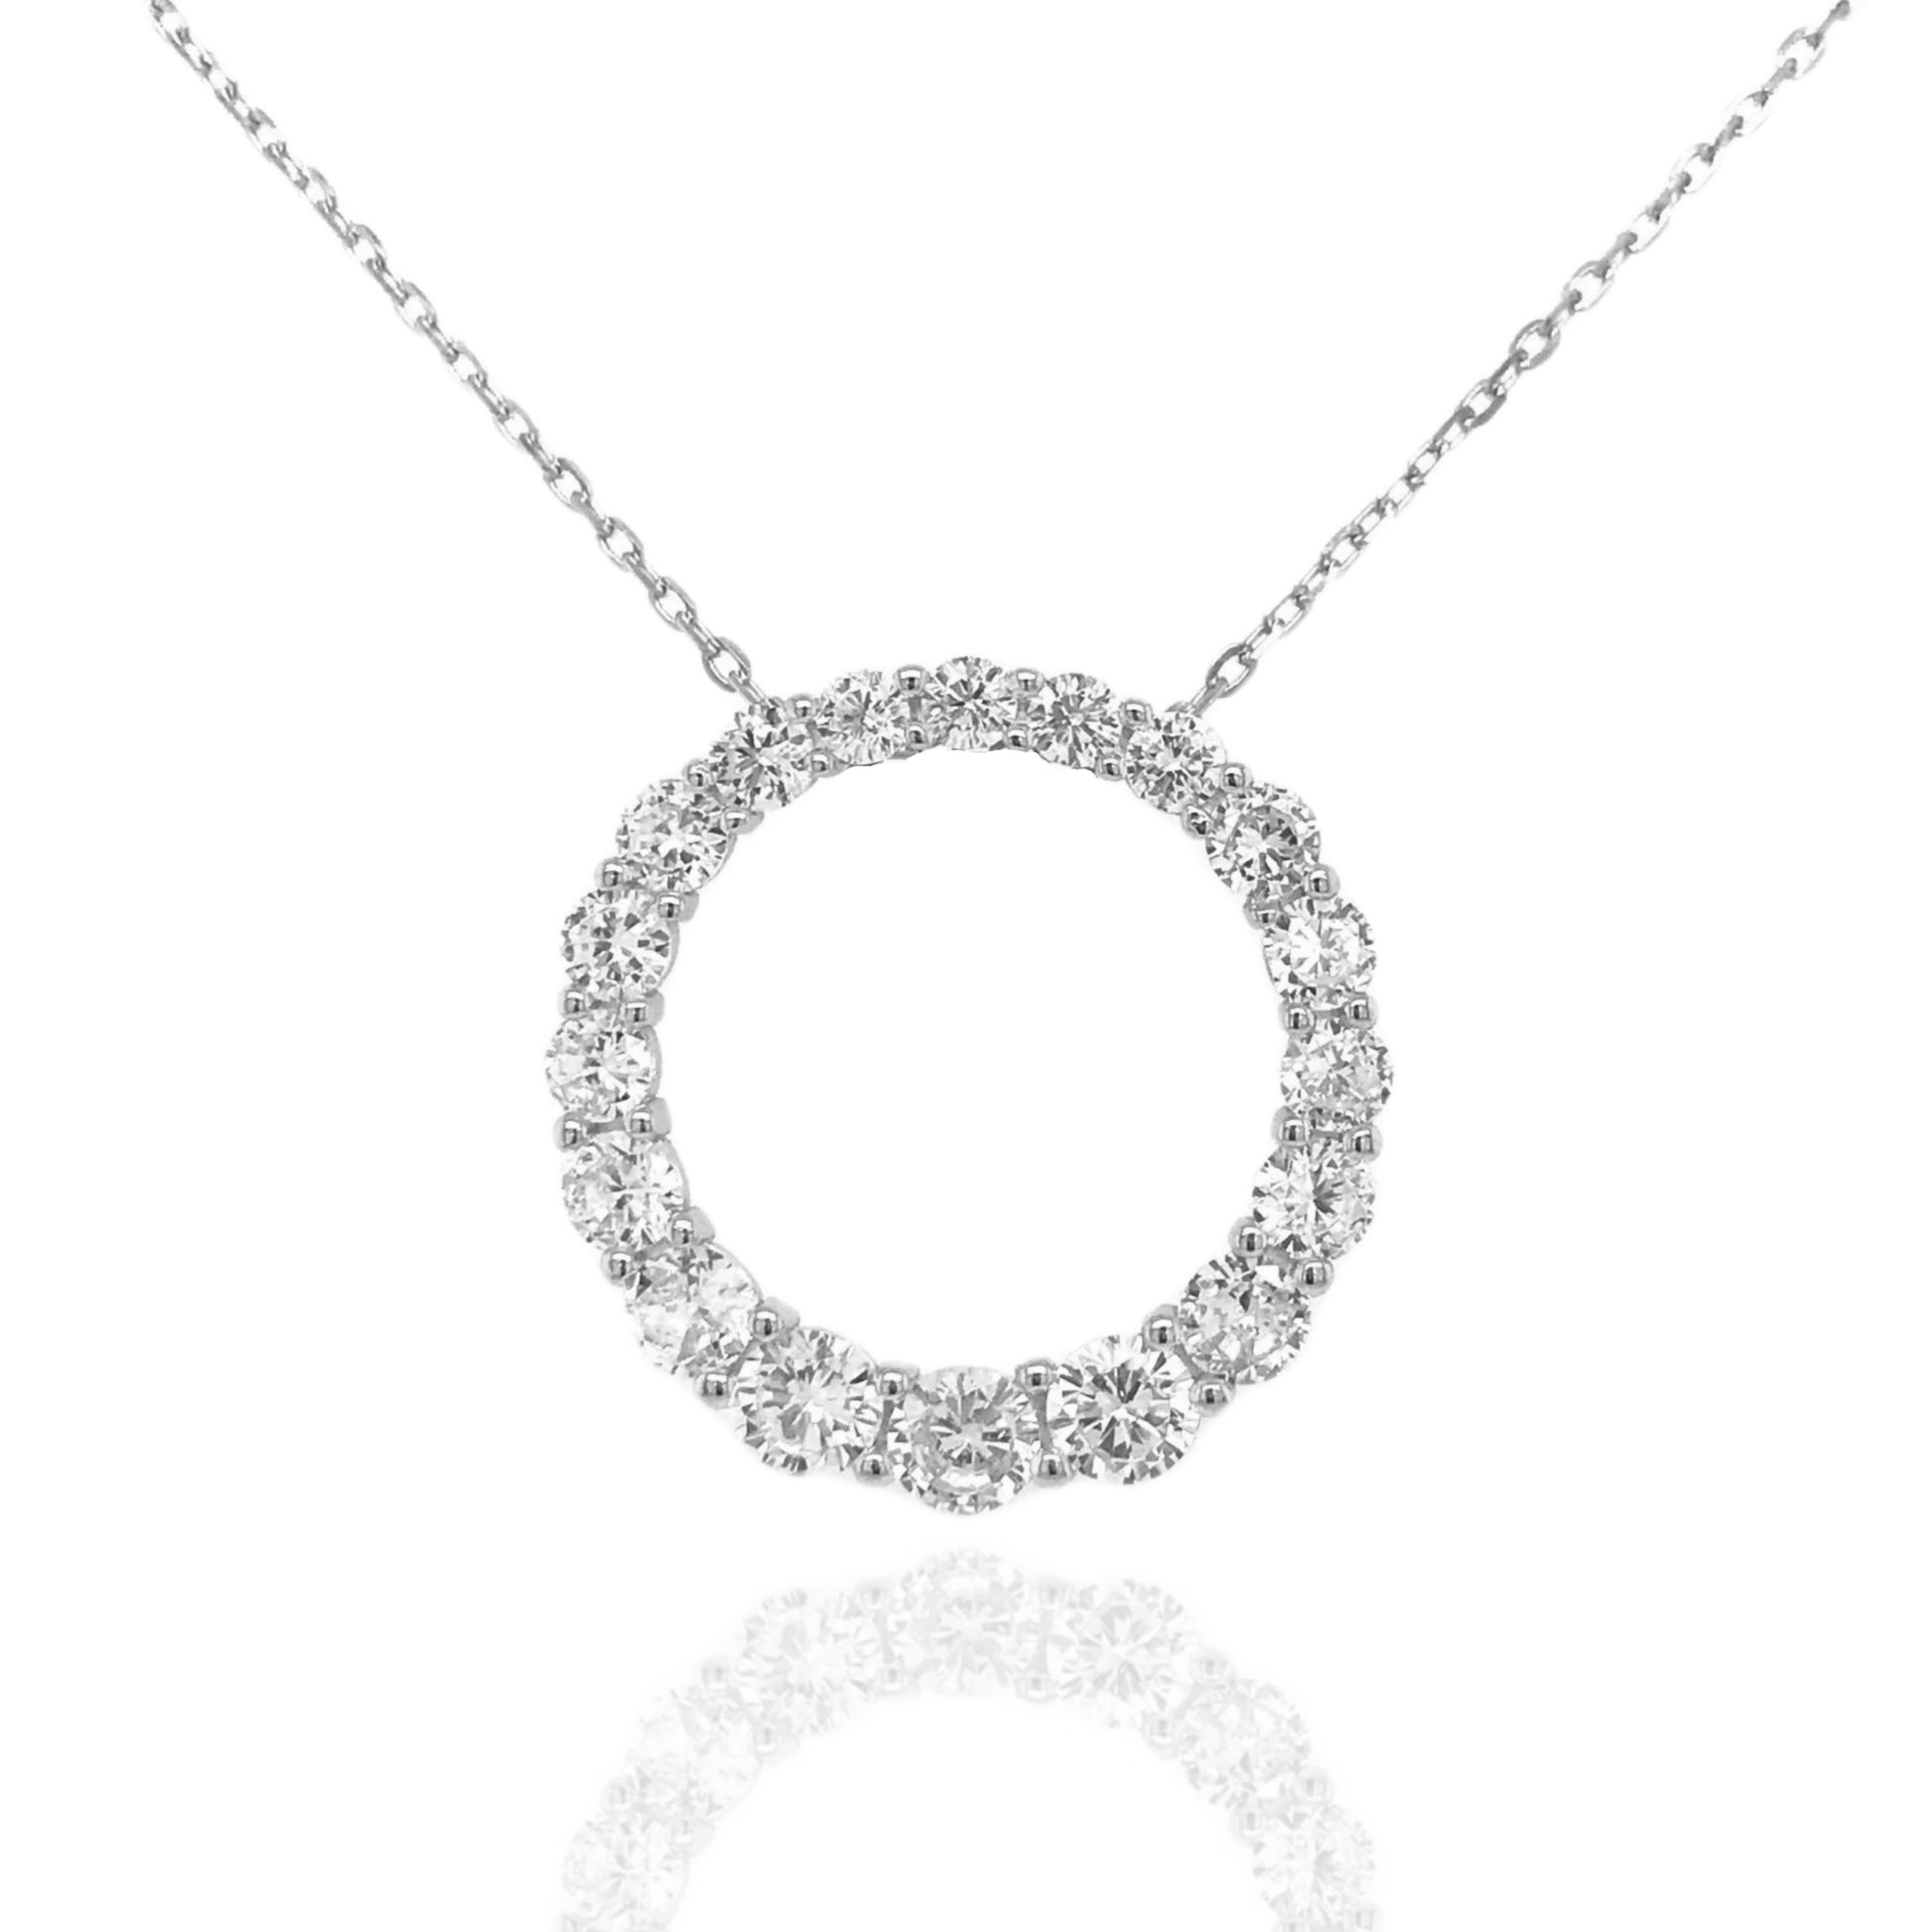 Sterling Silver Graduated CZ Circle Necklace - HK Jewels